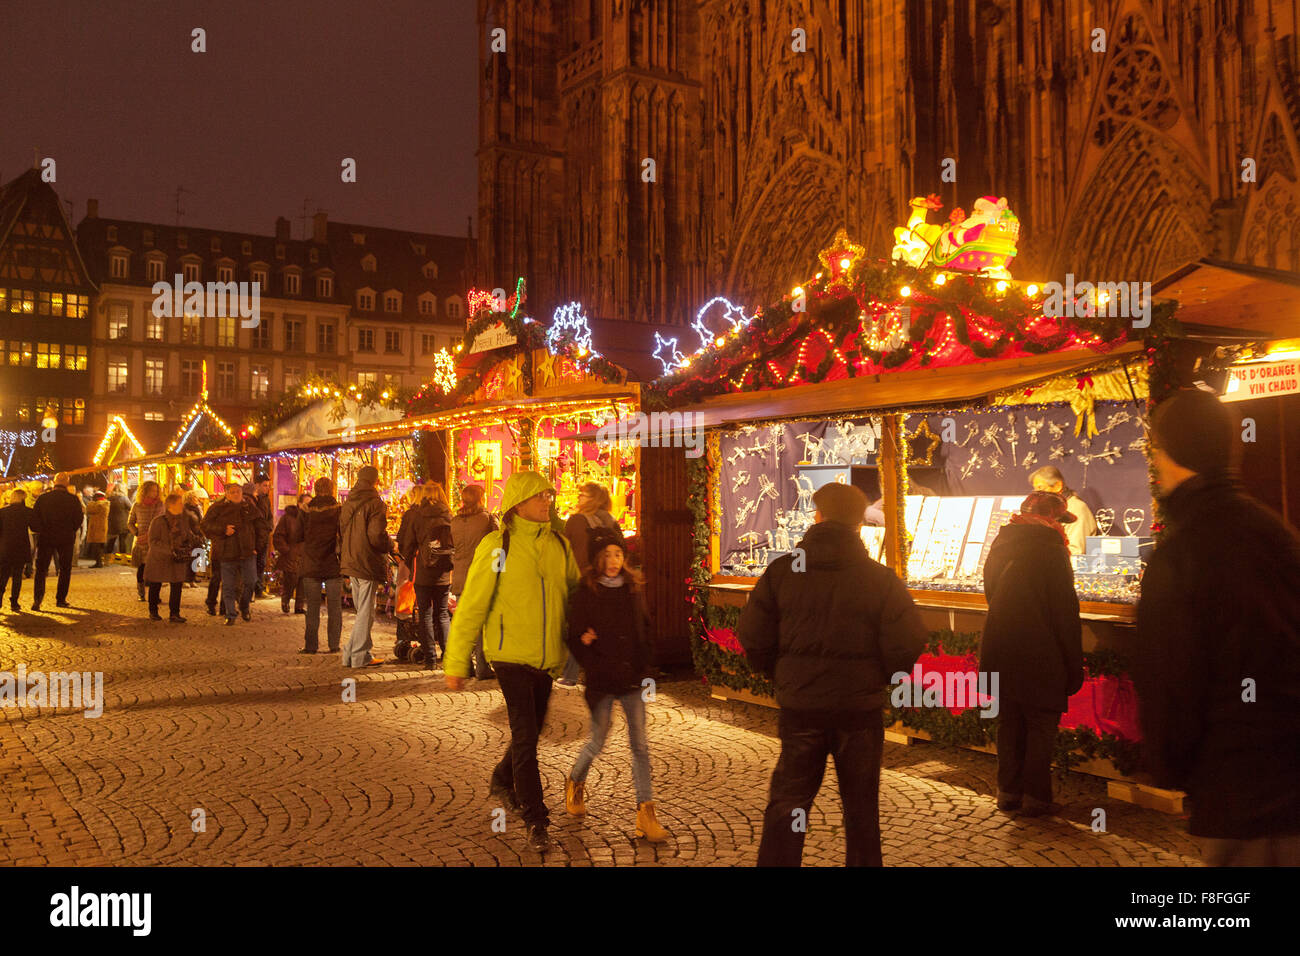 People shopping at Strasbourg Christmas market, Place de la cathedrale, Strasbourg, Alsace, France Europe Stock Photo